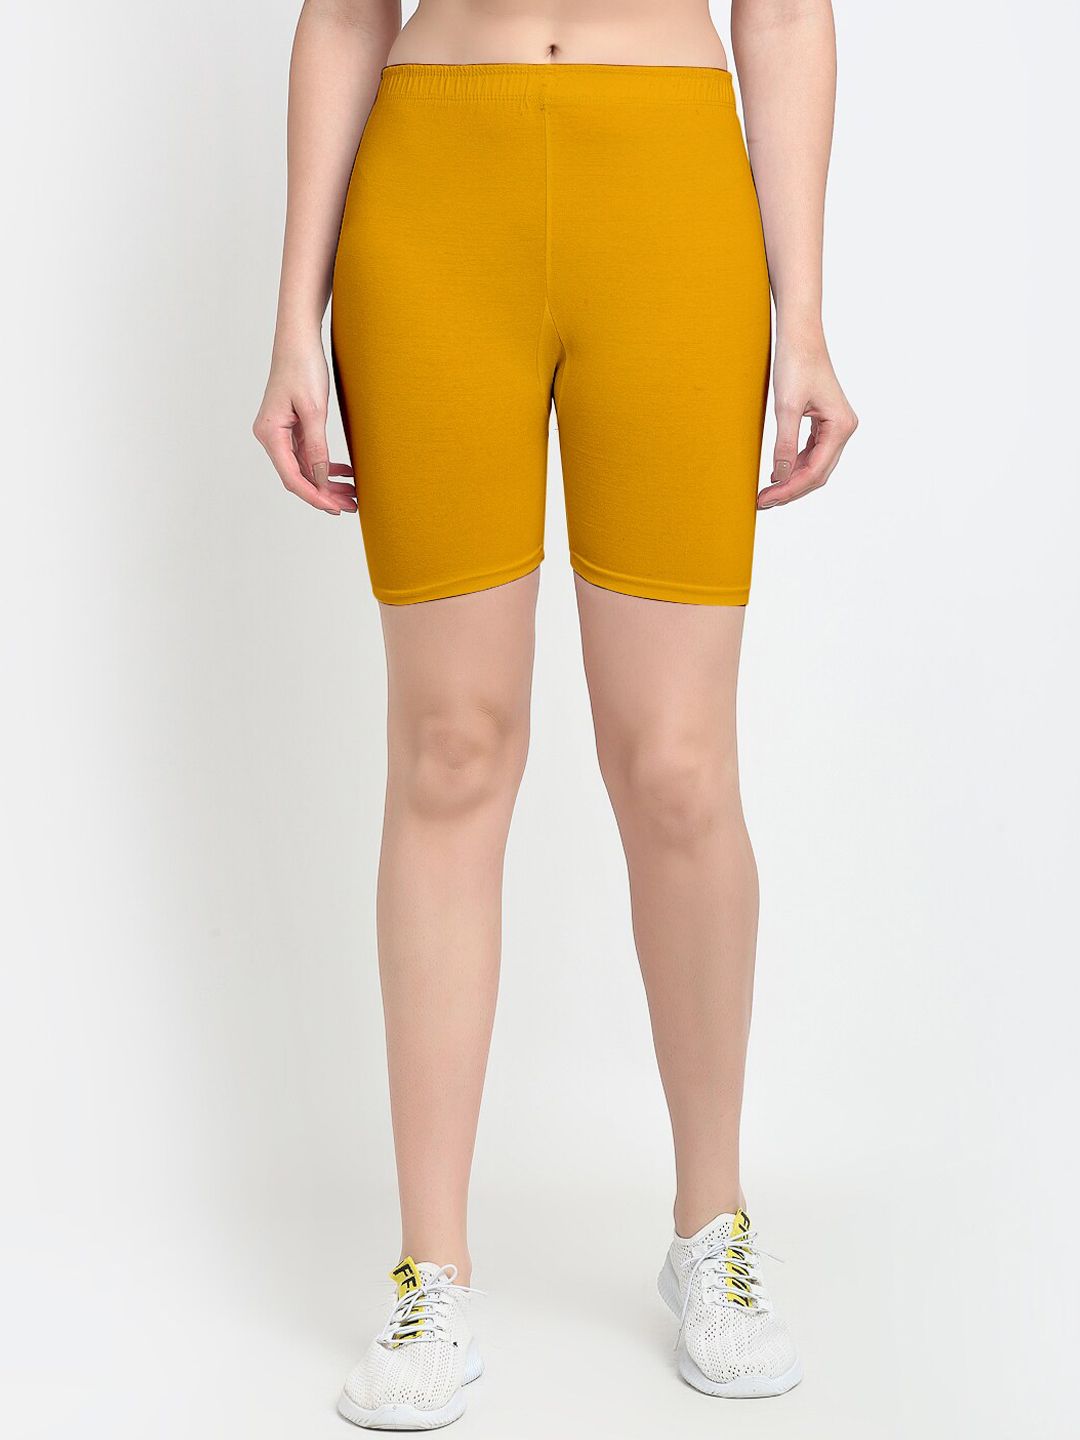 GRACIT Women Yellow Cycling Sports Shorts Price in India